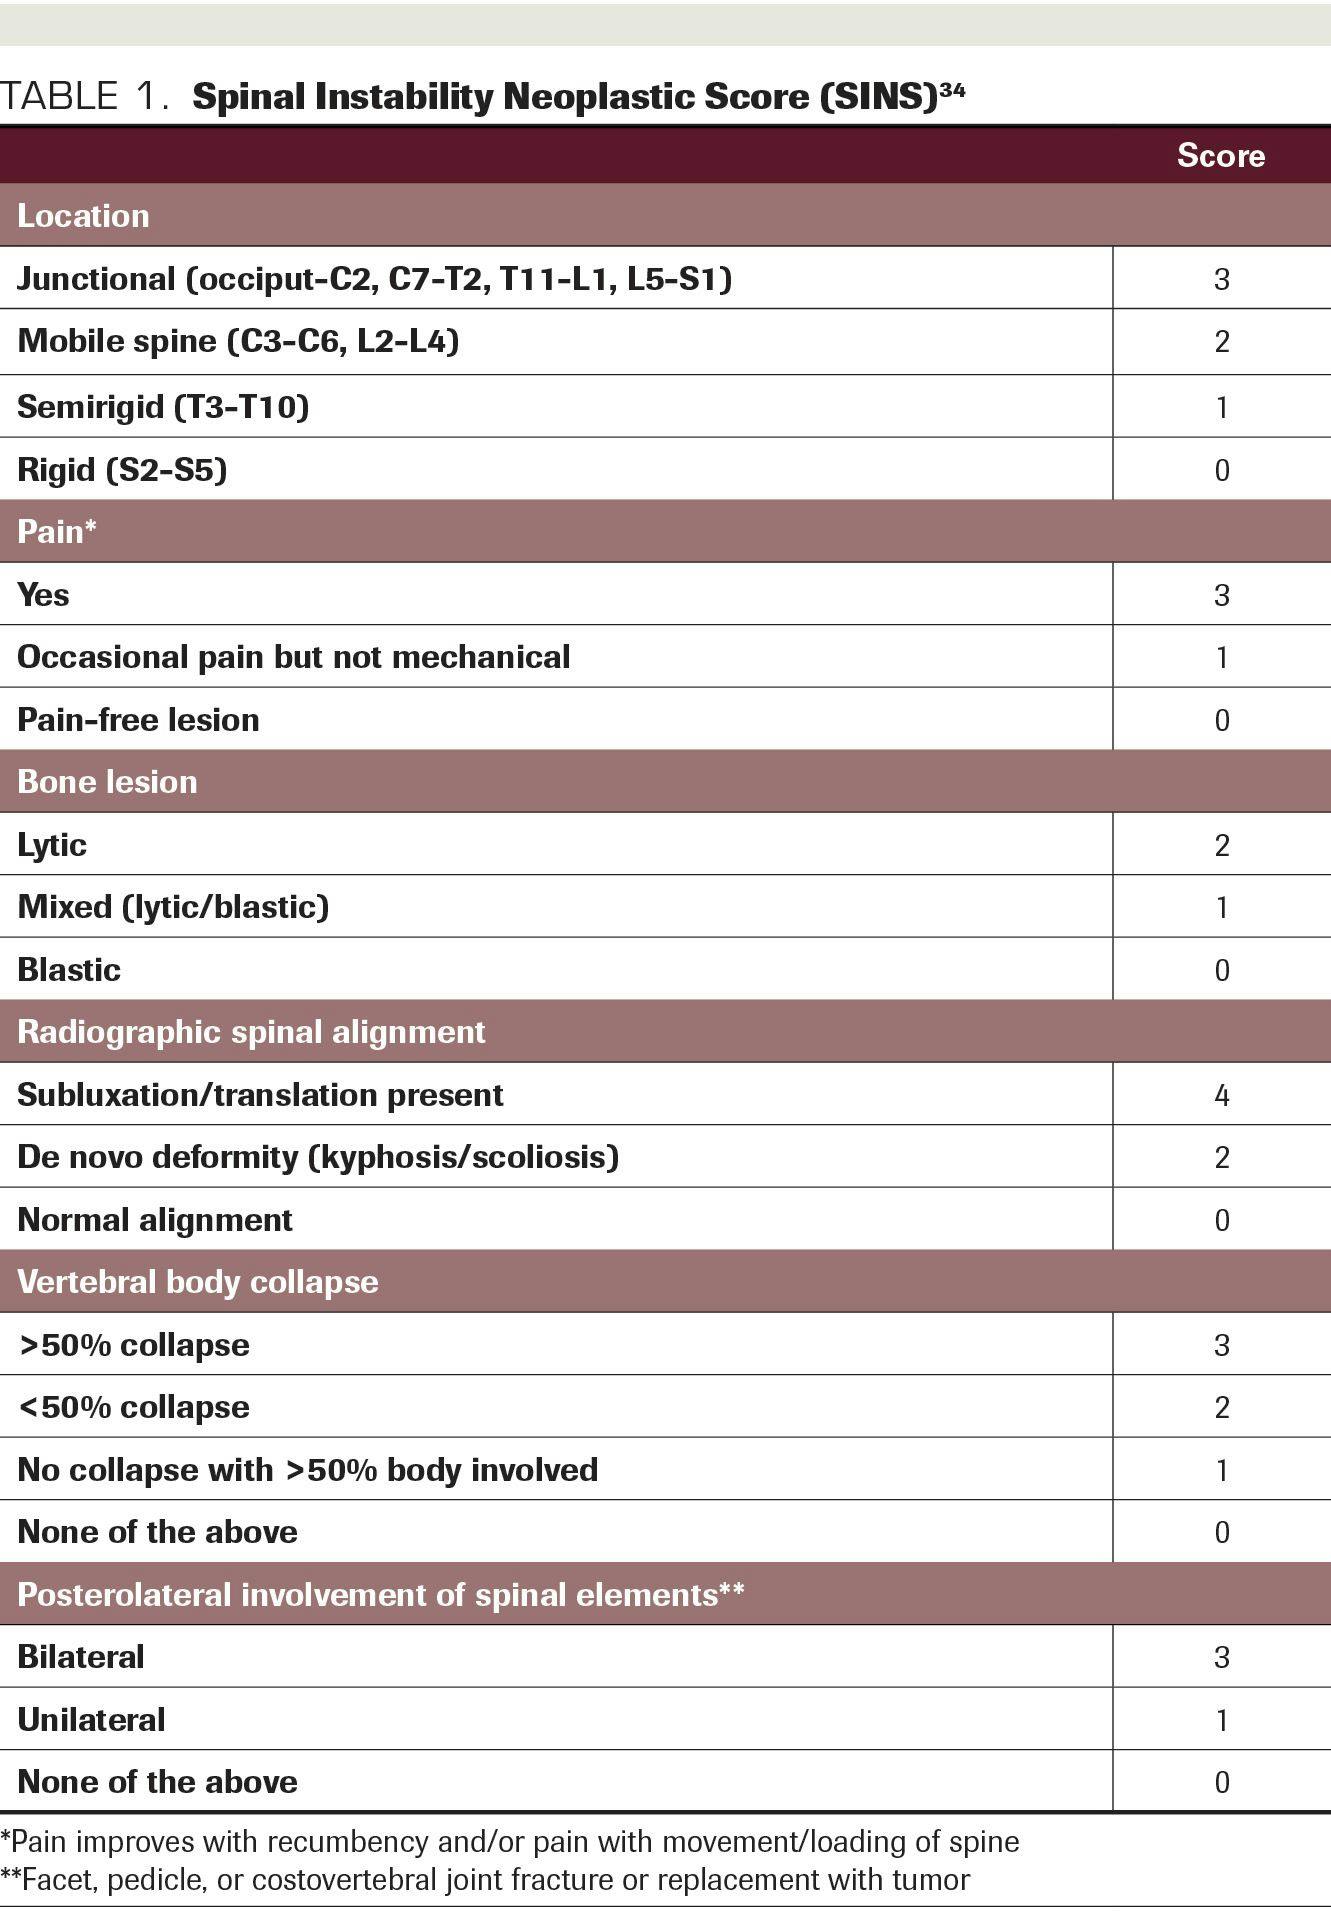 TABLE 1. Spinal Instability Neoplastic Score